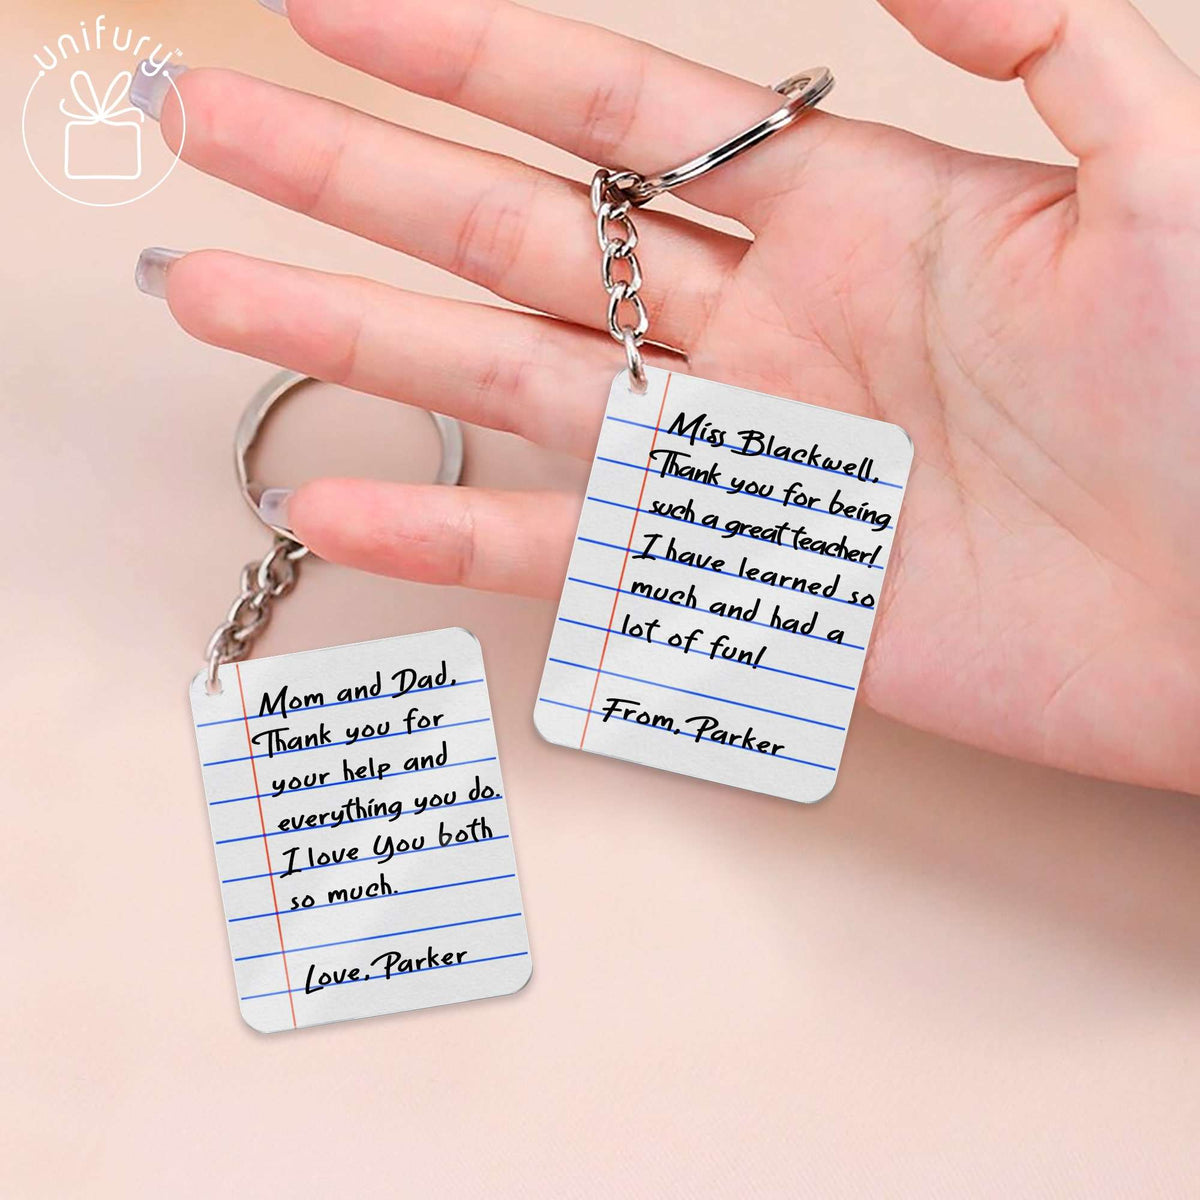 Personalized Letter Acrylic Keychain For Family